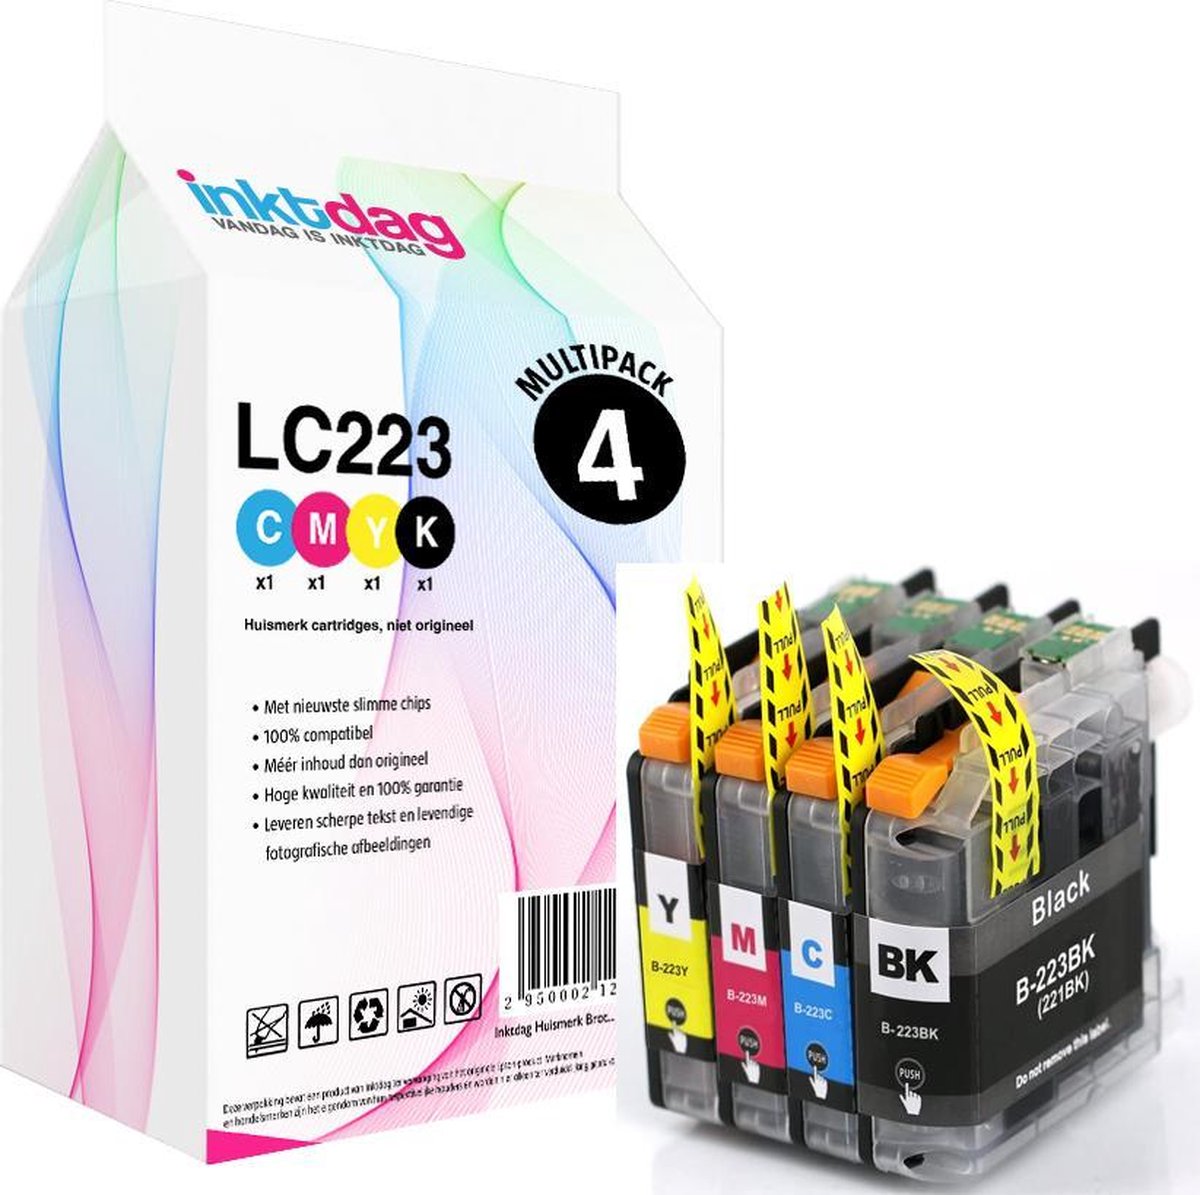 Inktdag Brother LC223 LC221 inktpatronen multipack set 4 stuks voor MFC J5320DW ,J4120DW ,J4420DW ,J880DW ,J480DW, J4620DW, J5620DW, J680DW, J5625DW, J4625DW ,J5720DW